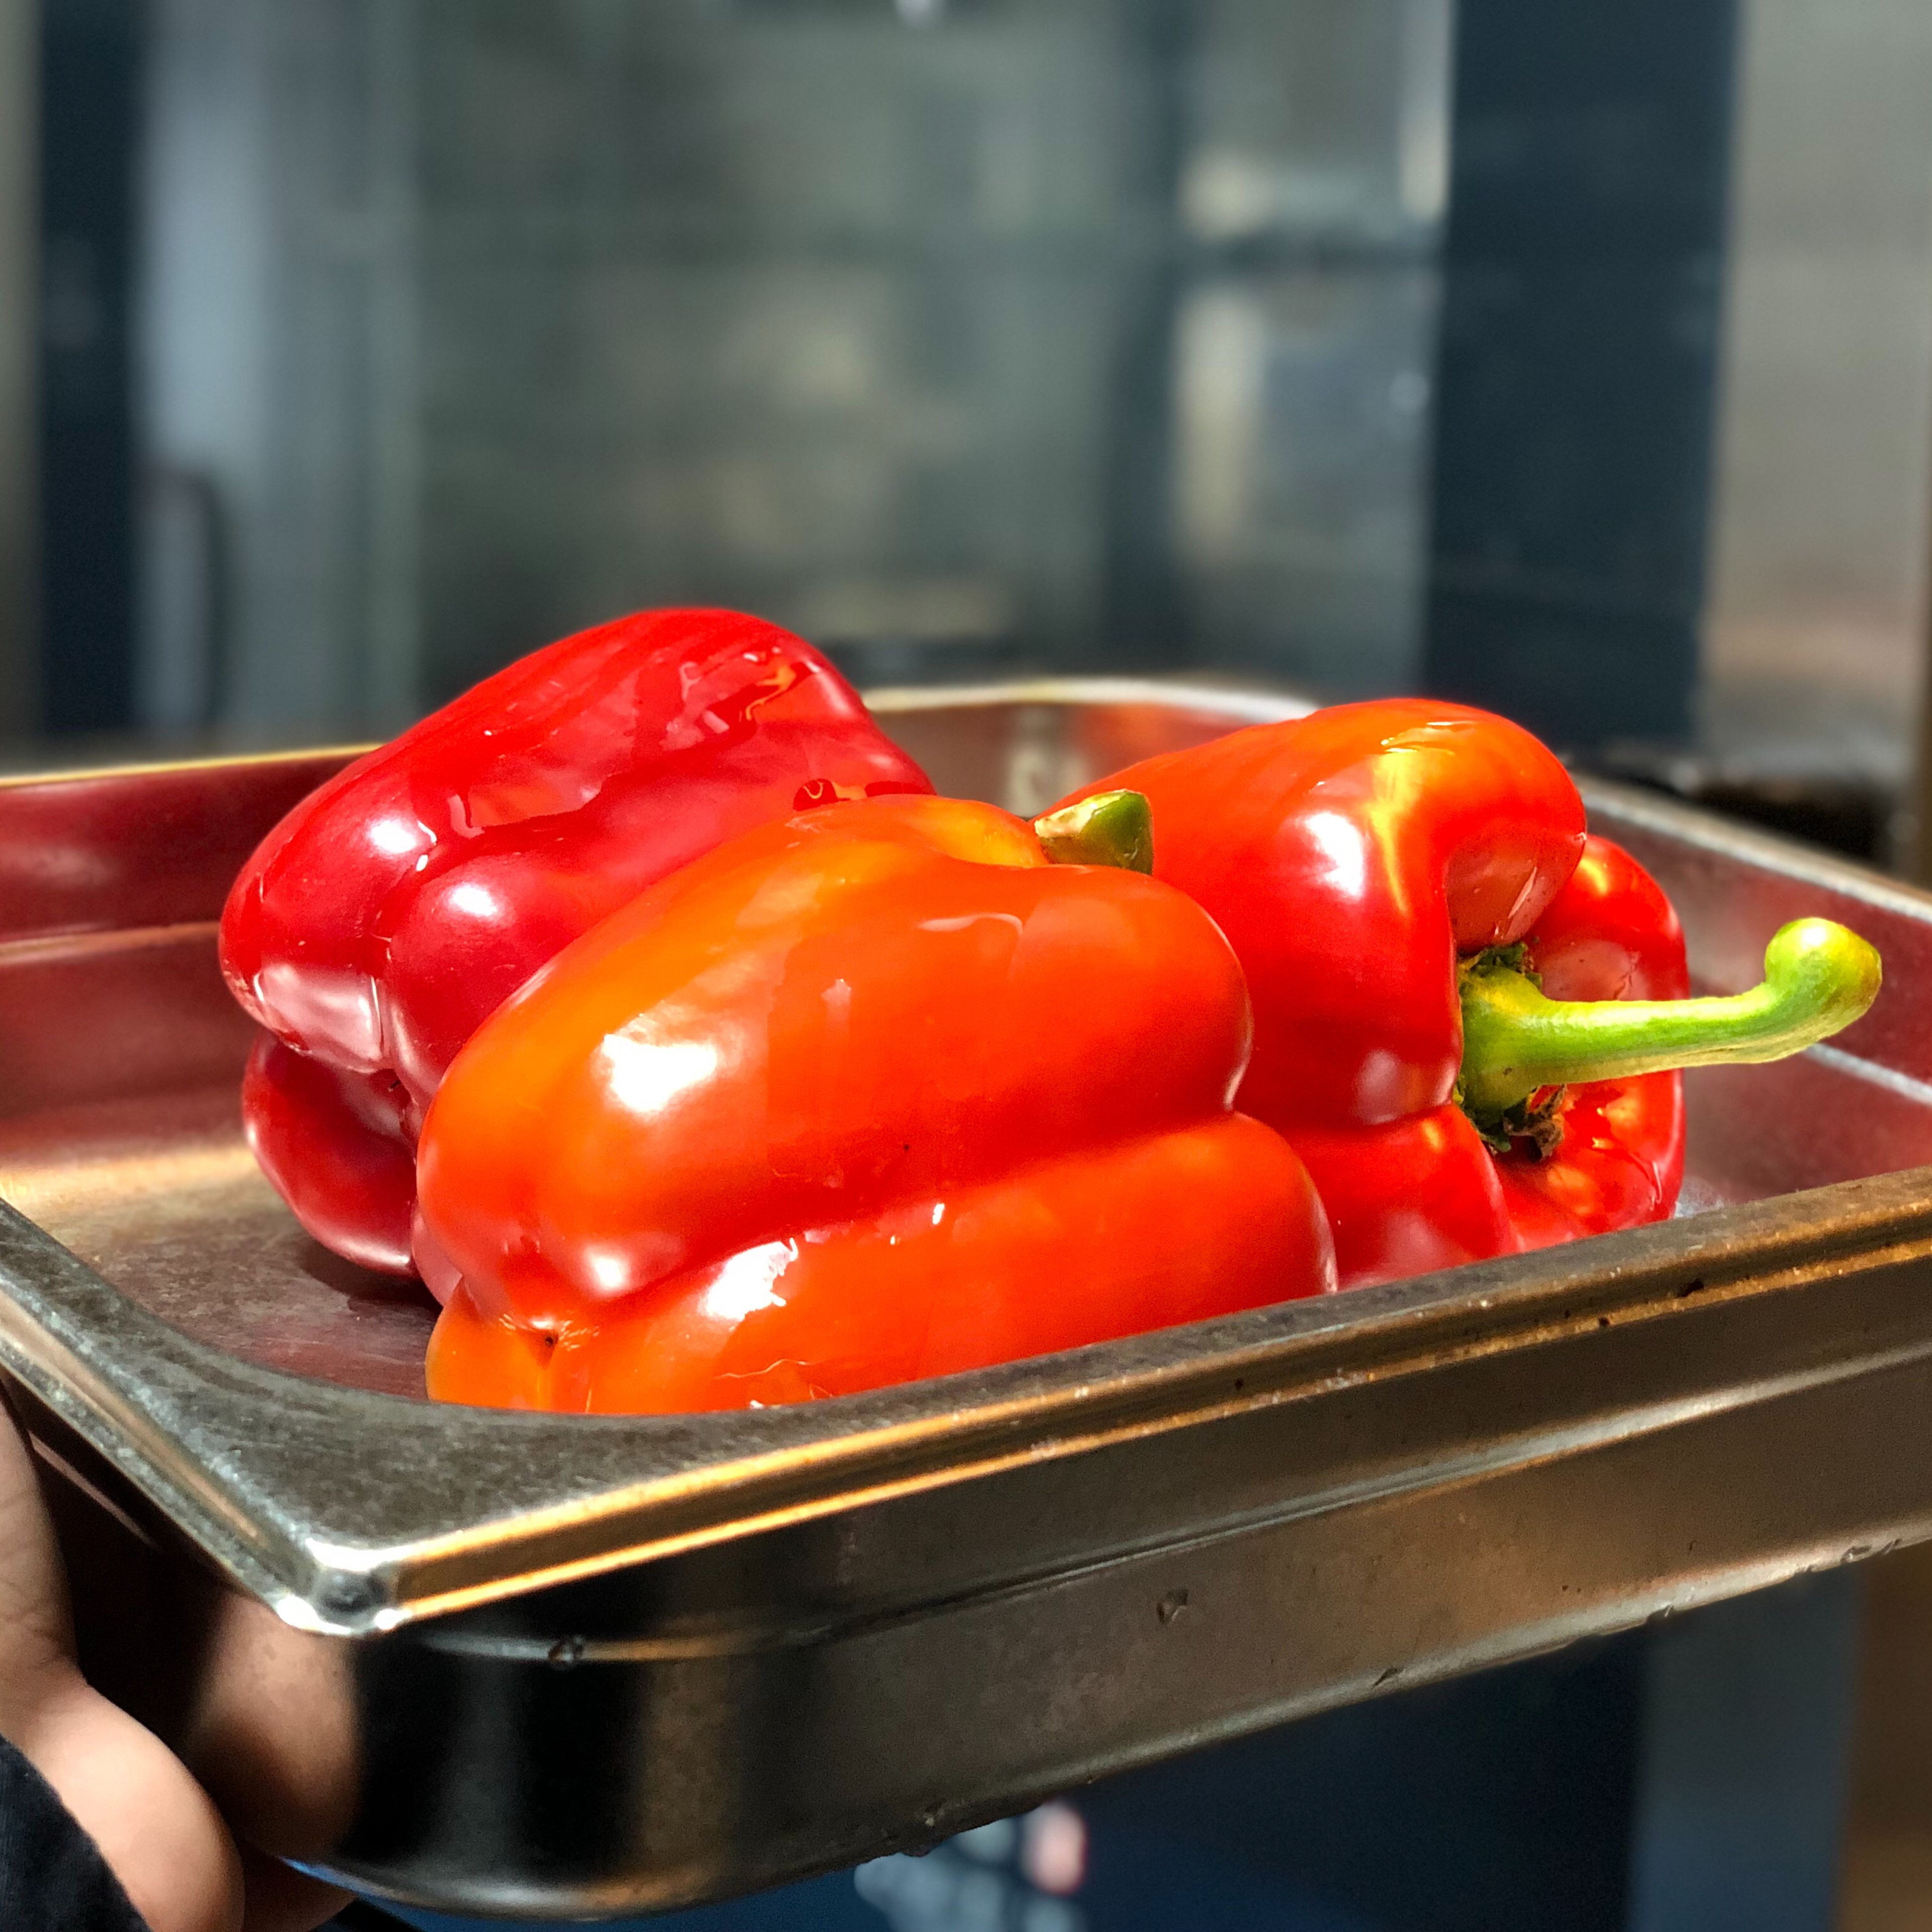 Preheat oven to 200 degrees C. Rub oil on peppers and put them in the oven to roast for about 30 minutes. Take out of the oven when it’s roasted and let rest for 15 minutes.